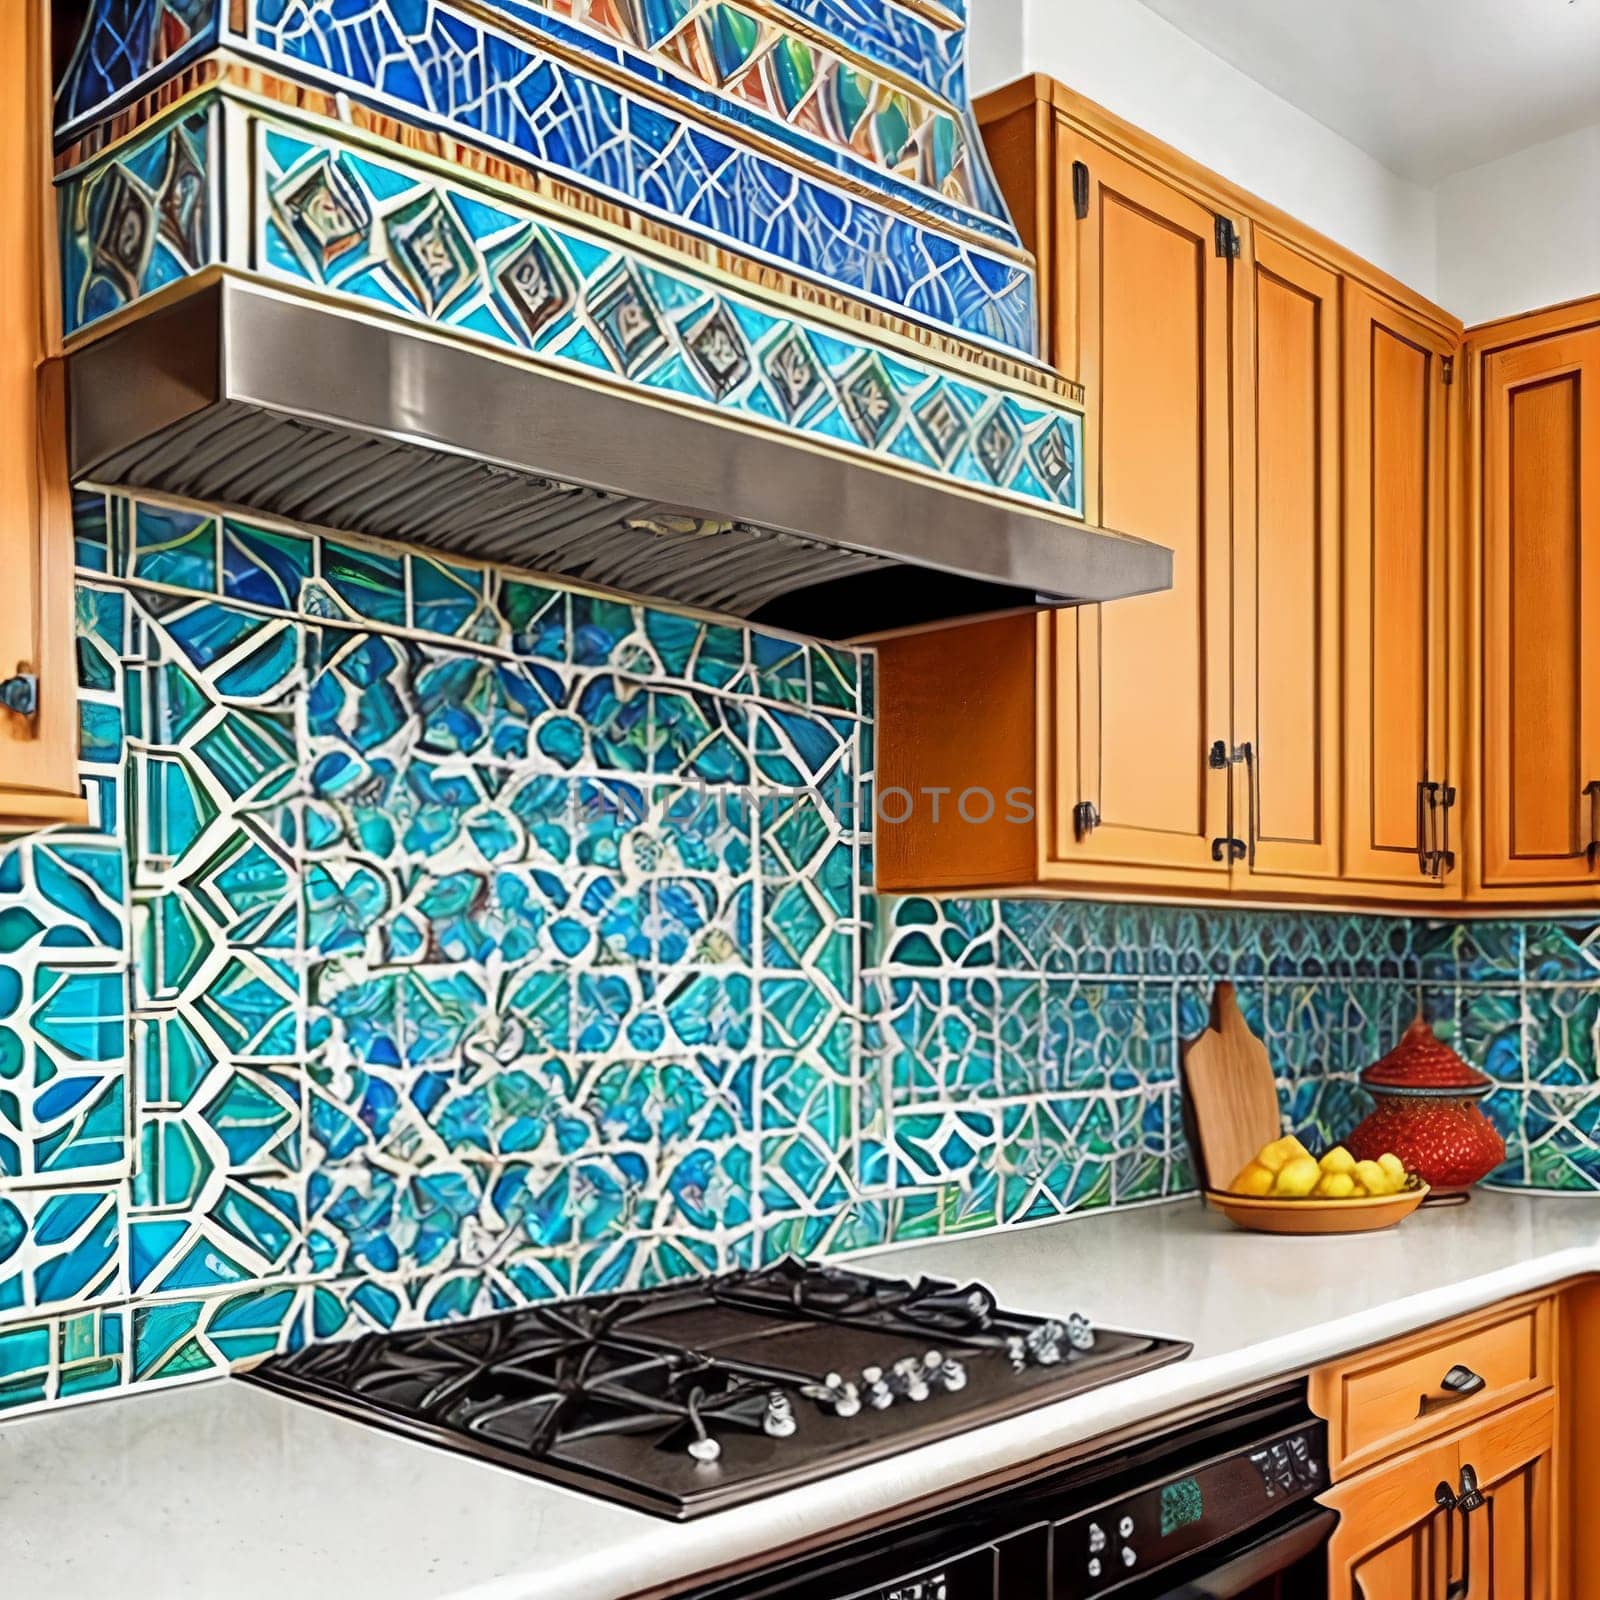 Intricate patterns of a Moroccan-inspired mosaic tile backsplash in a kitchen. by GoodOlga